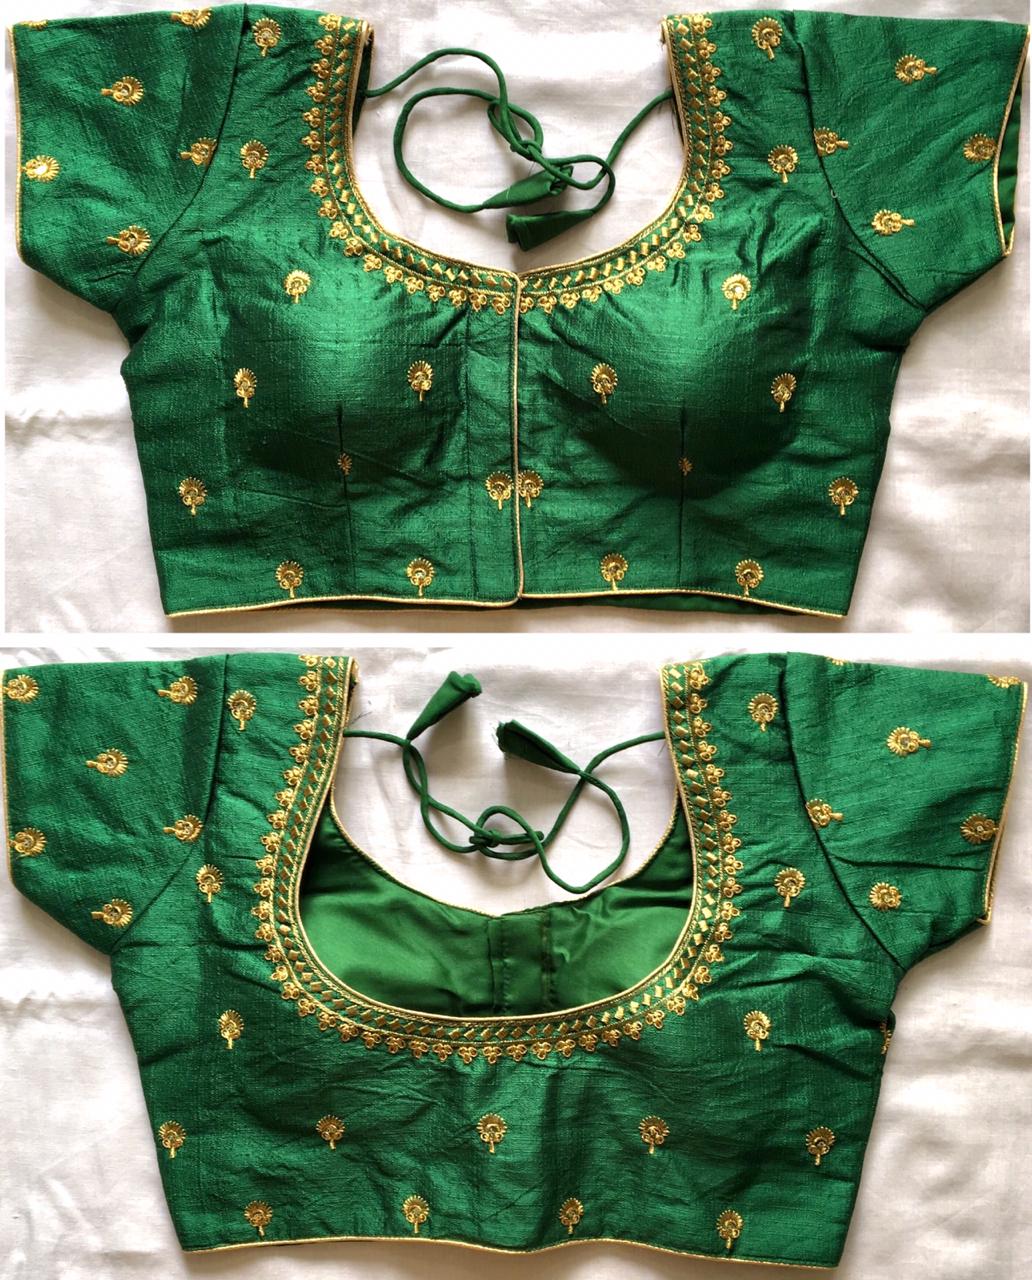 Blouse has Sequance ,Zari and Thread Work